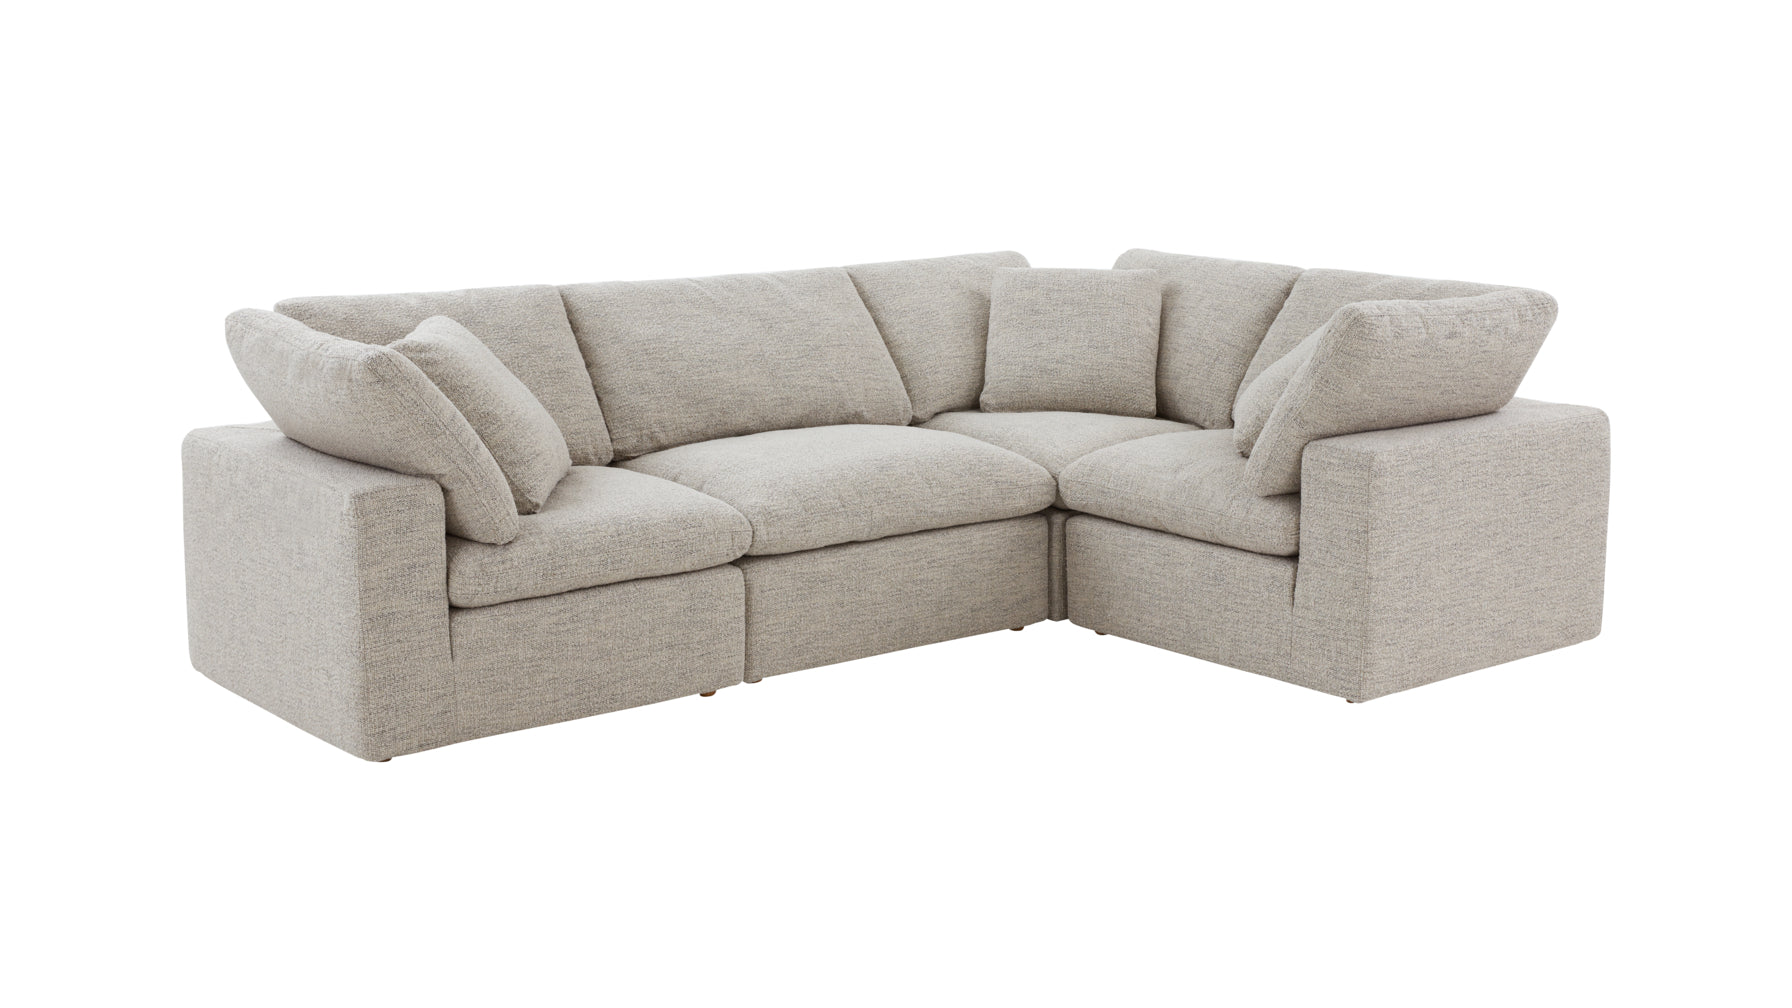 Movie Night™ 4-Piece Modular Sectional Closed, Large, Oatmeal - Image 3